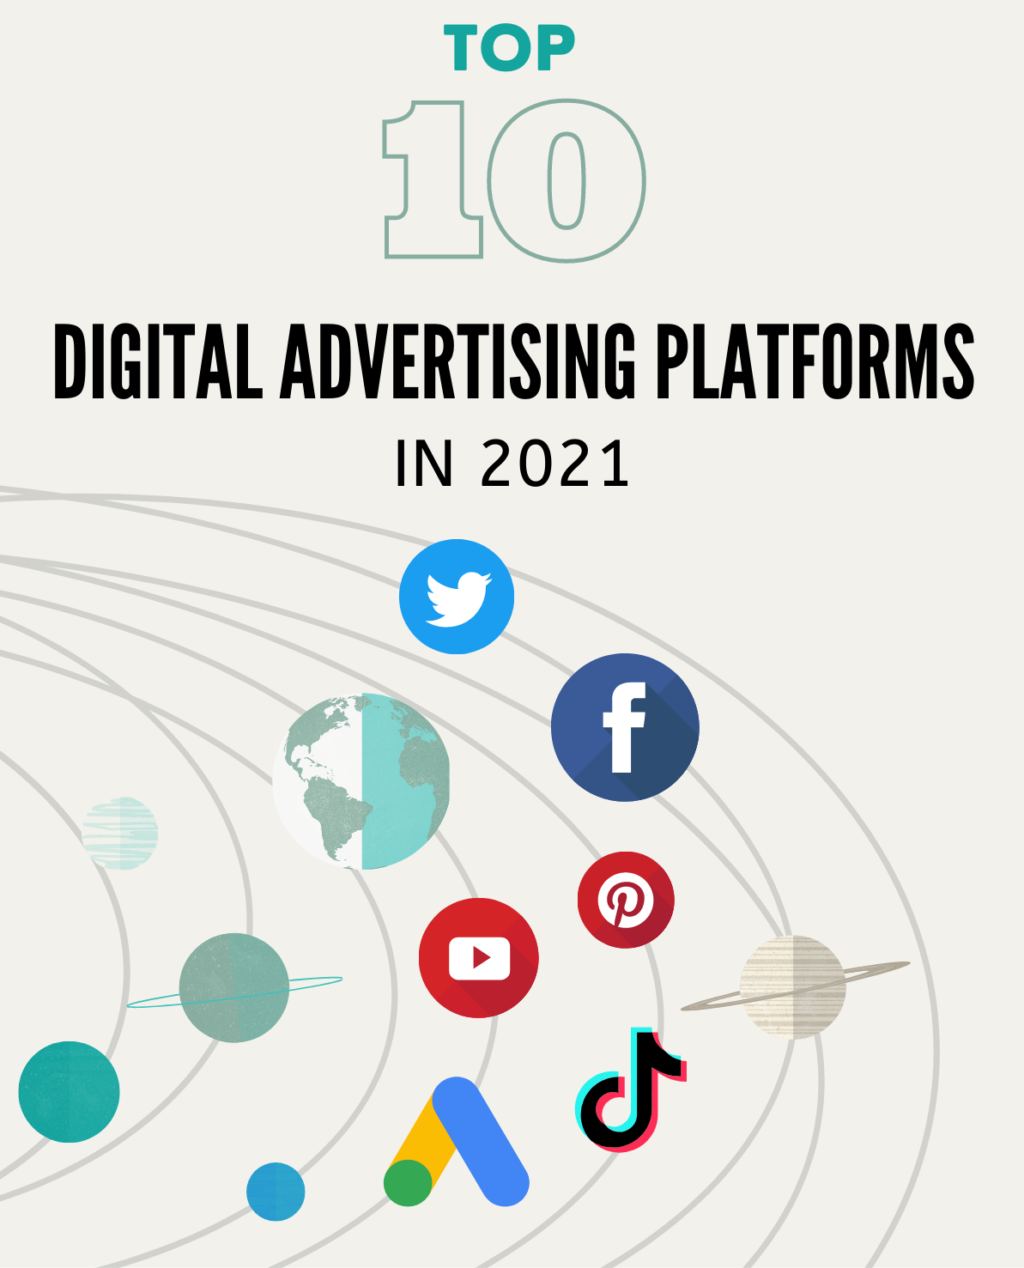 Top 10 digital advertising platforms for promoting your business in 2021